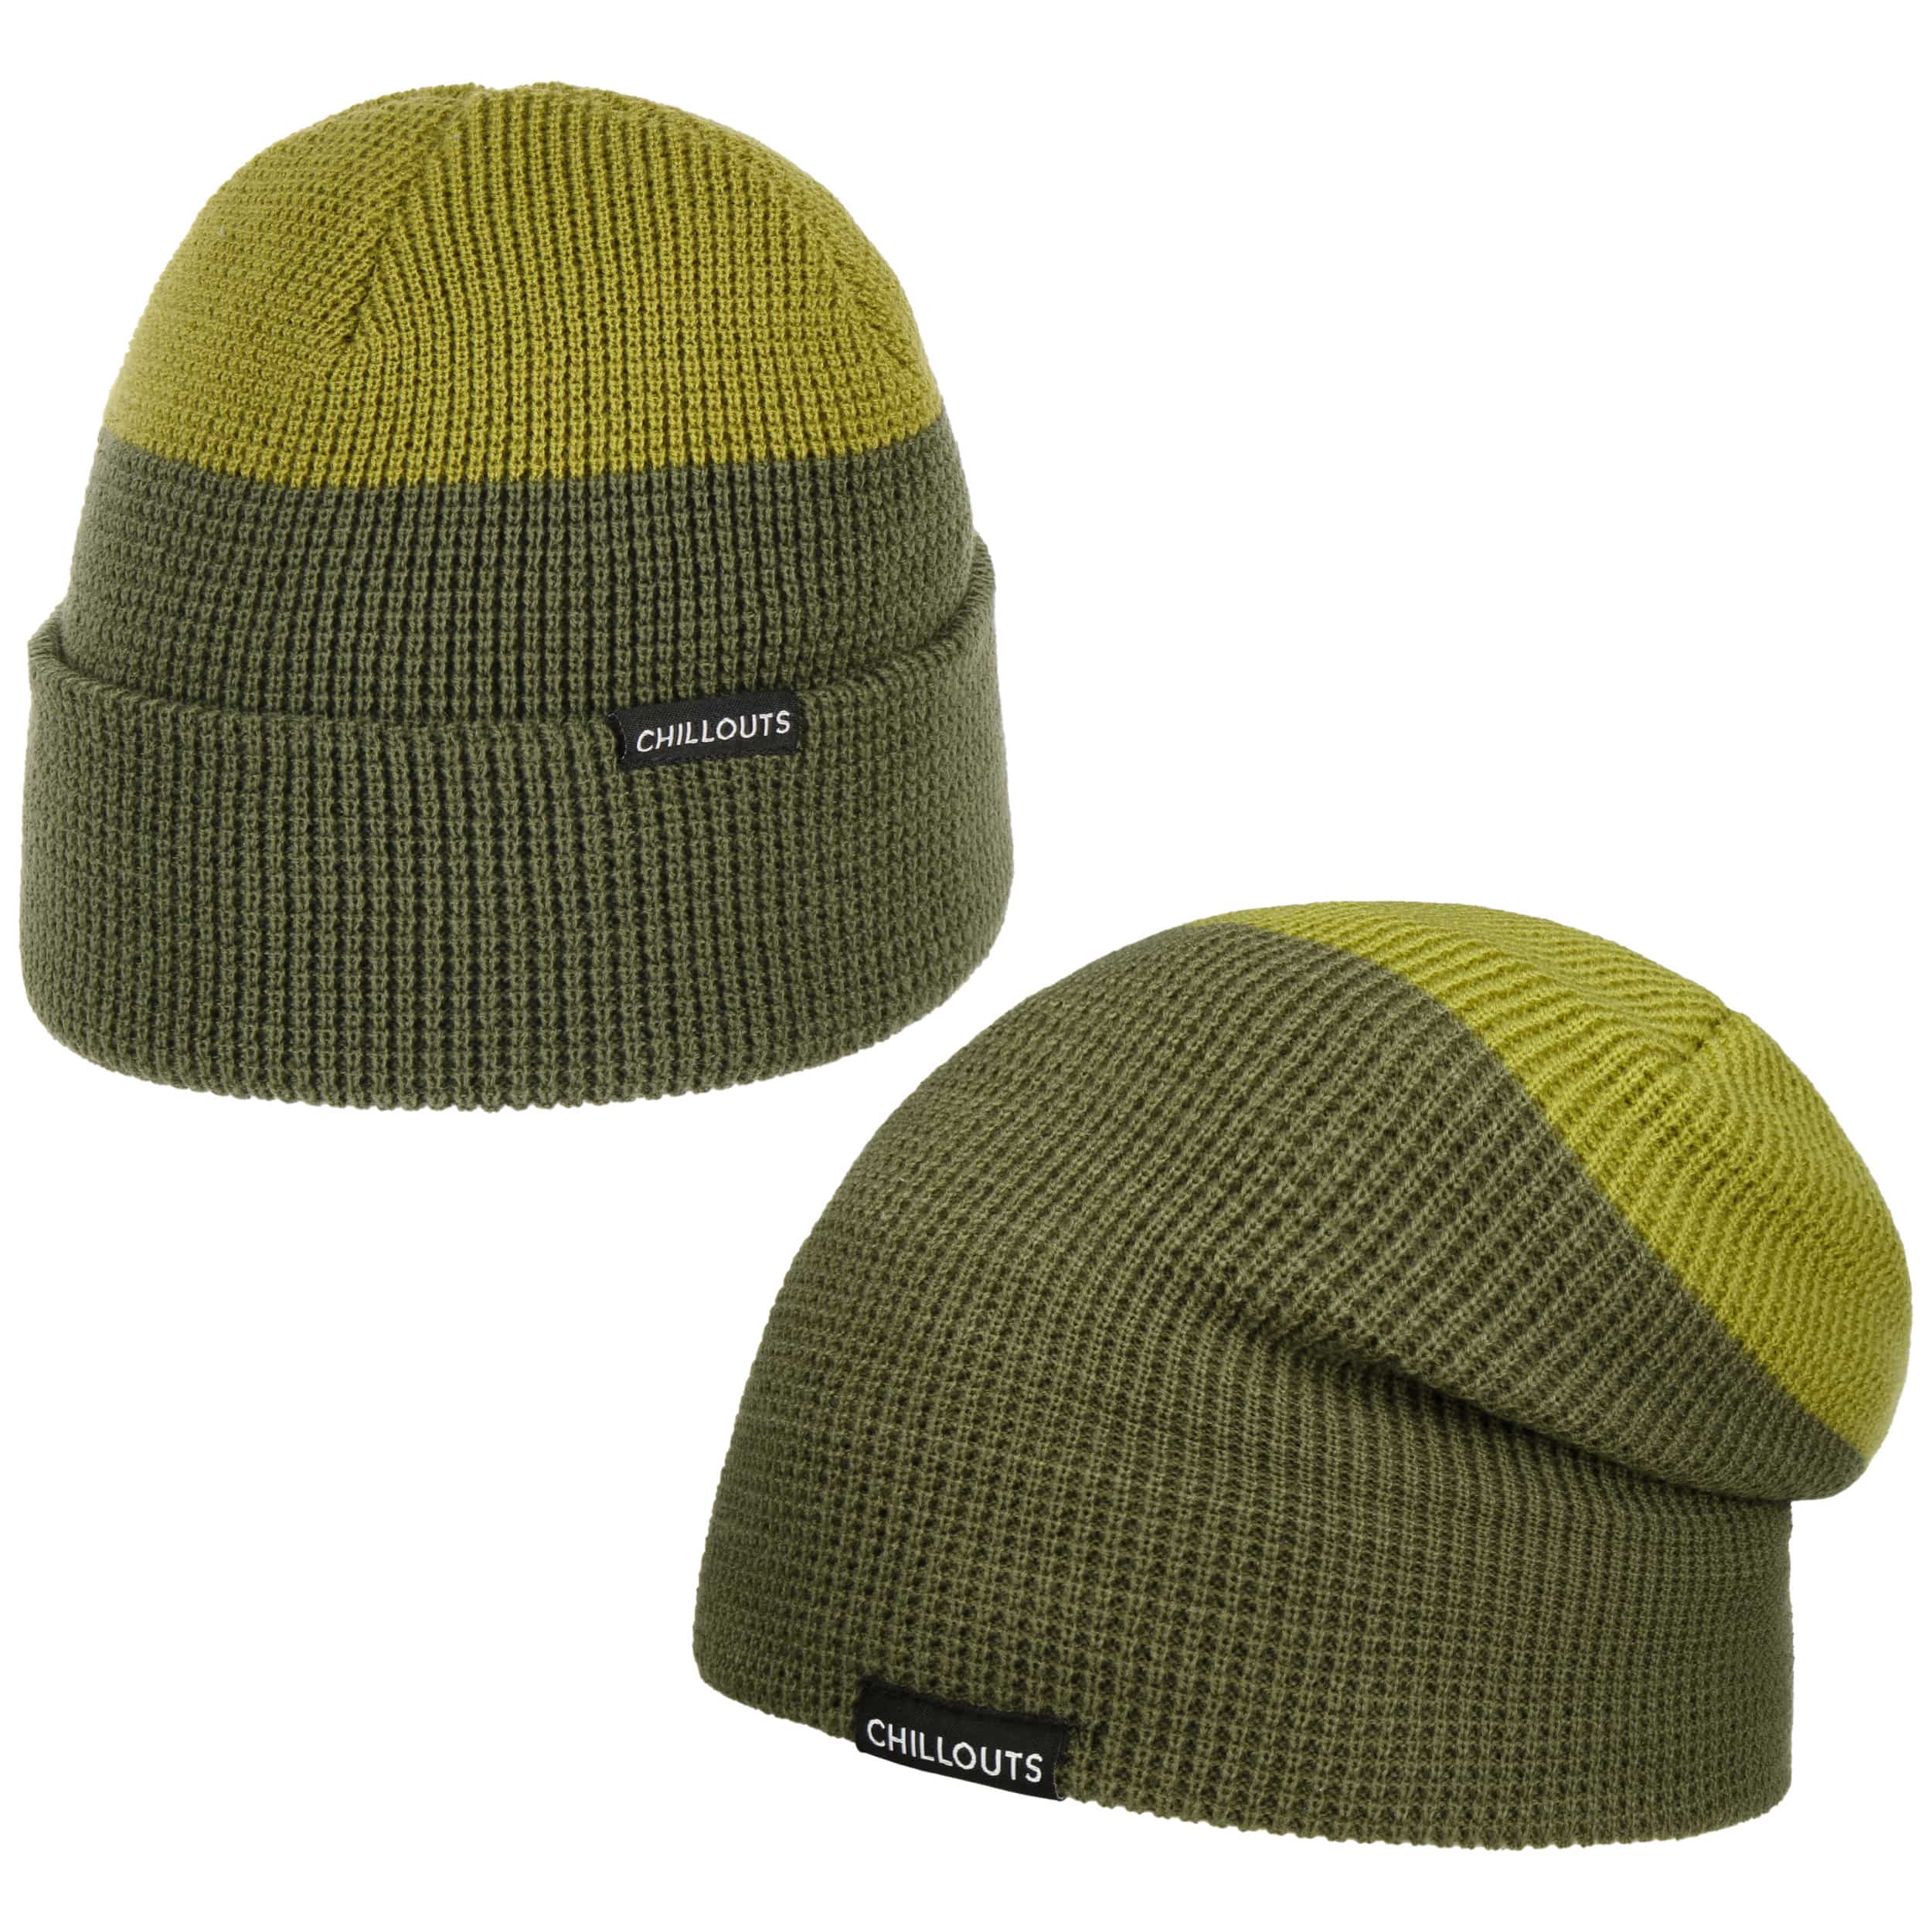 Malou Twotone Beanie Hat by Chillouts 22,95 € 